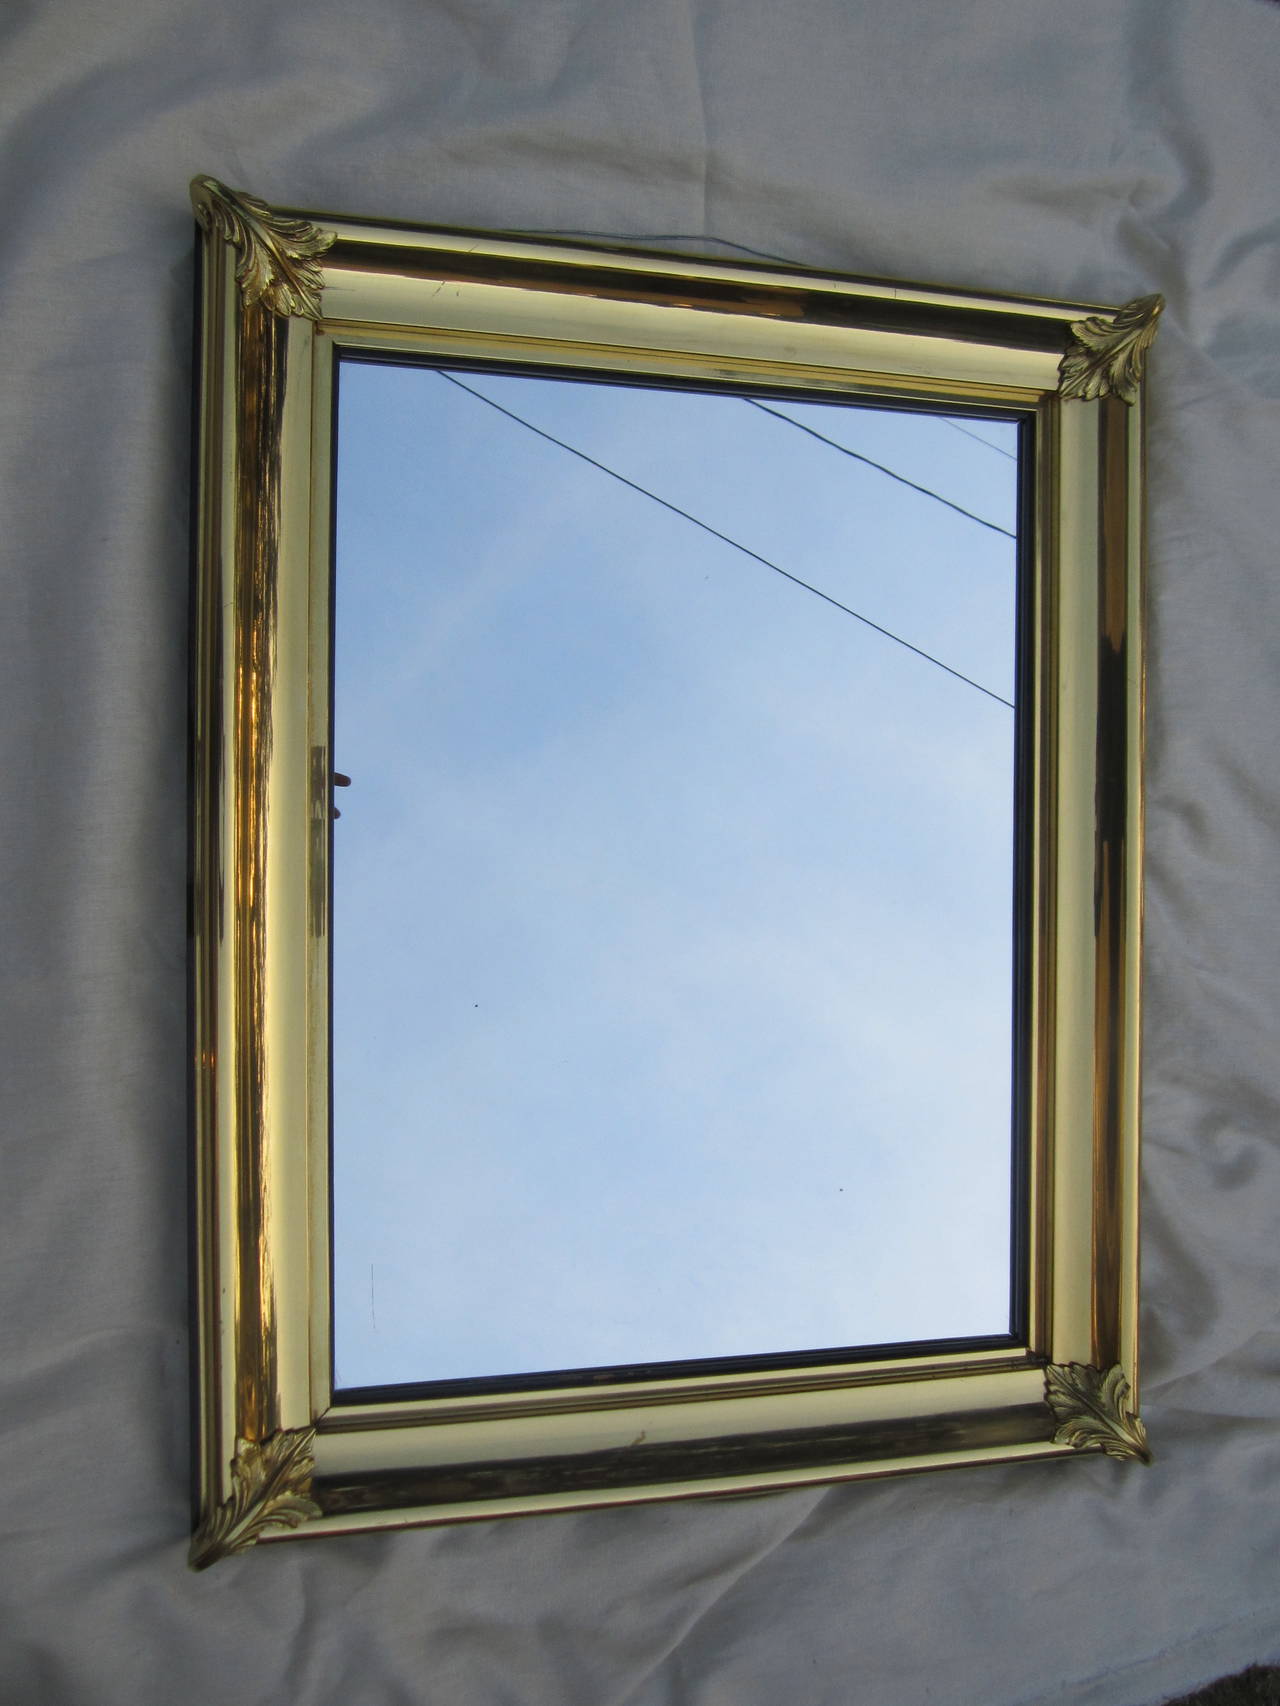 Handsome brass framed mirror with decorative acanthus leaves at corners.....